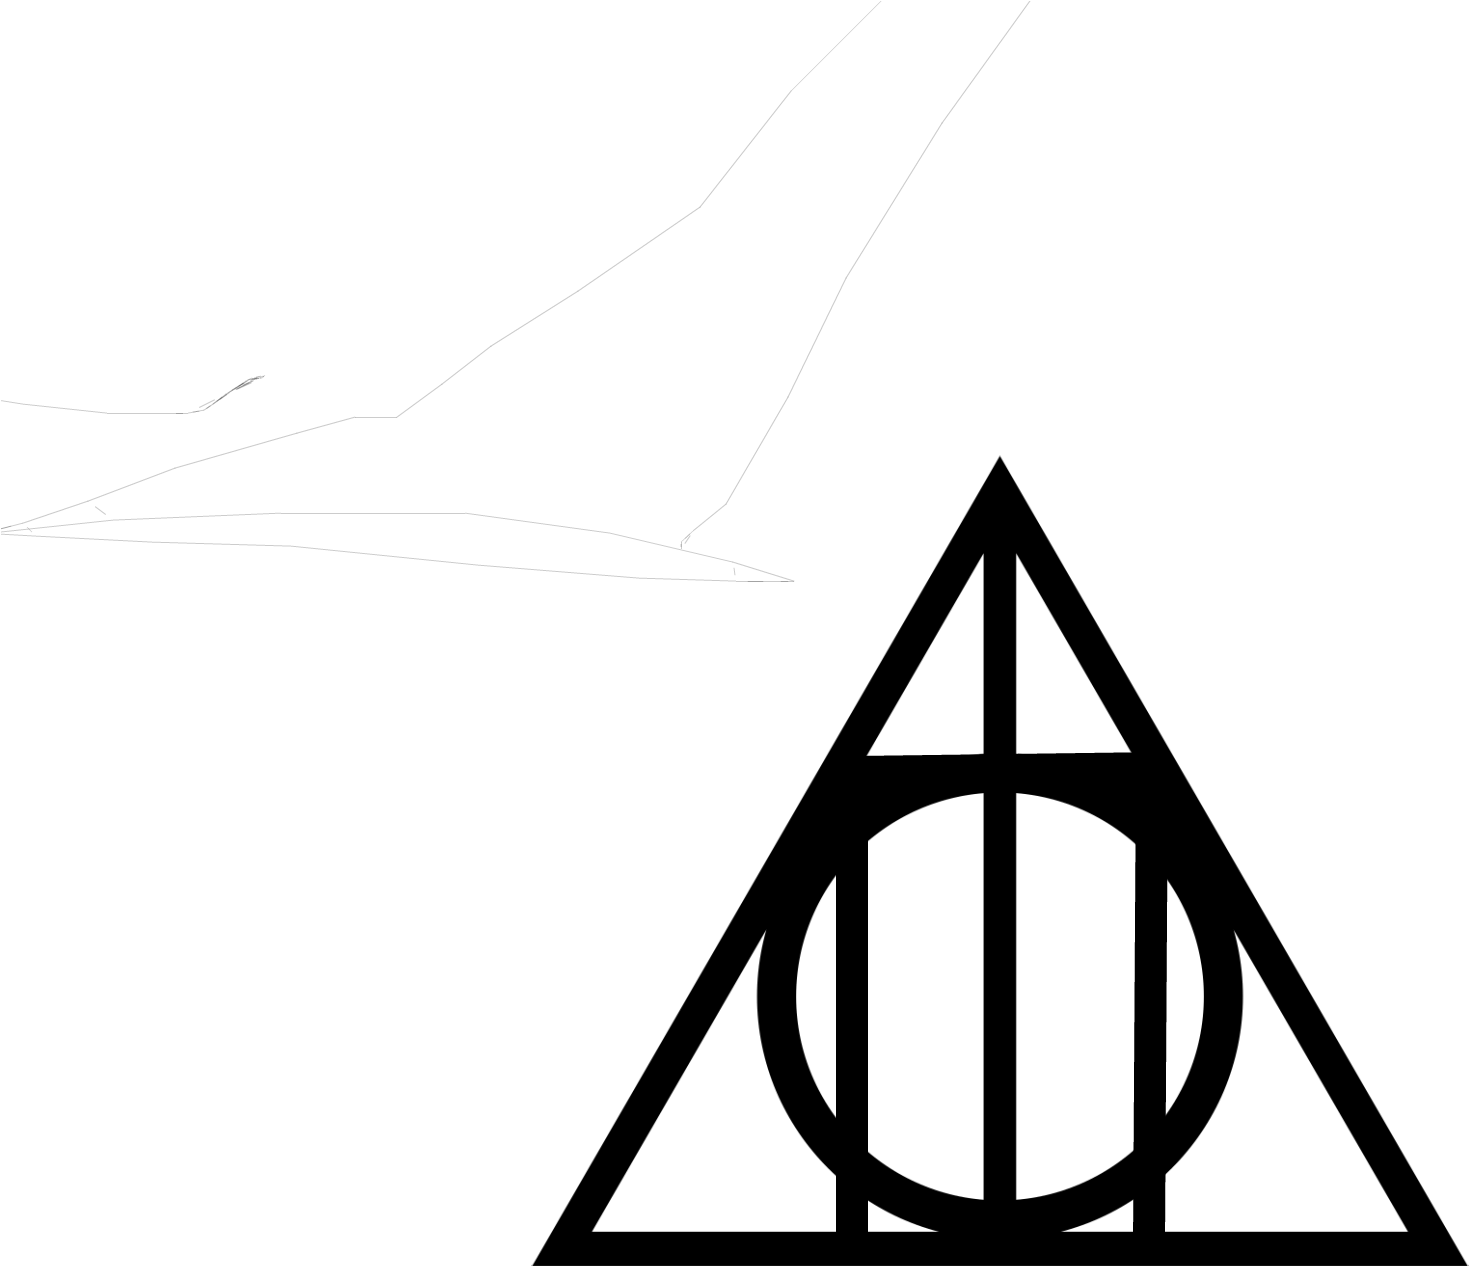 A Black Background With A Triangle And A Circle